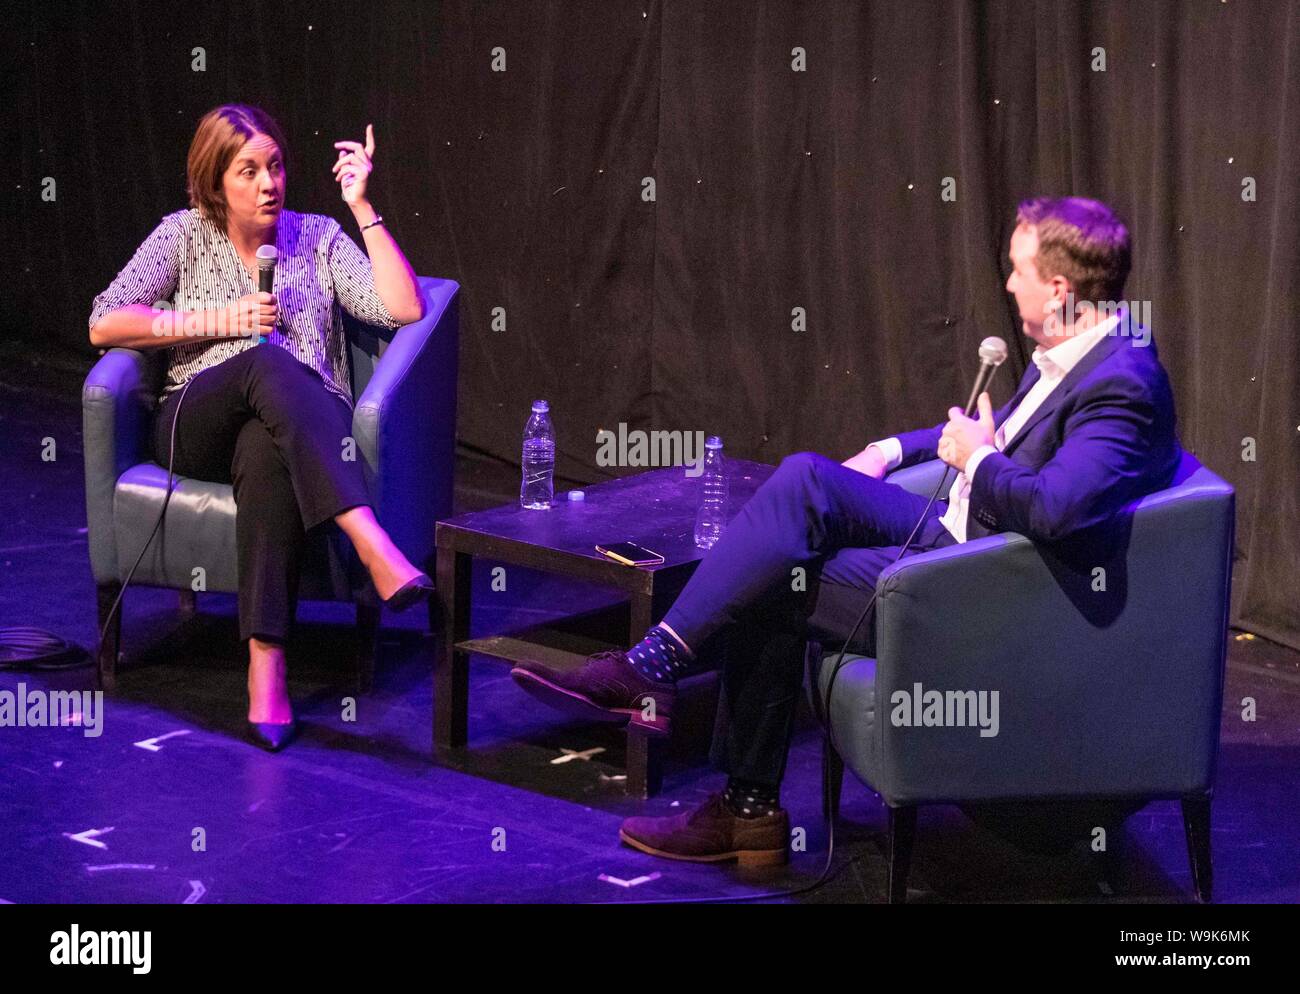 Edinburgh, UK. 14th Aug, 2019. Kezia Dugdale takes part in an interview with Matt Forde at the Edinburgh Fringe Festival. During the interview she confessed that she didn't think Jeremy Corbyn will become Prime Minister. Pictured: Kezia Dugdale and Matt Forde Credit: Rich Dyson/Alamy Live News Stock Photo